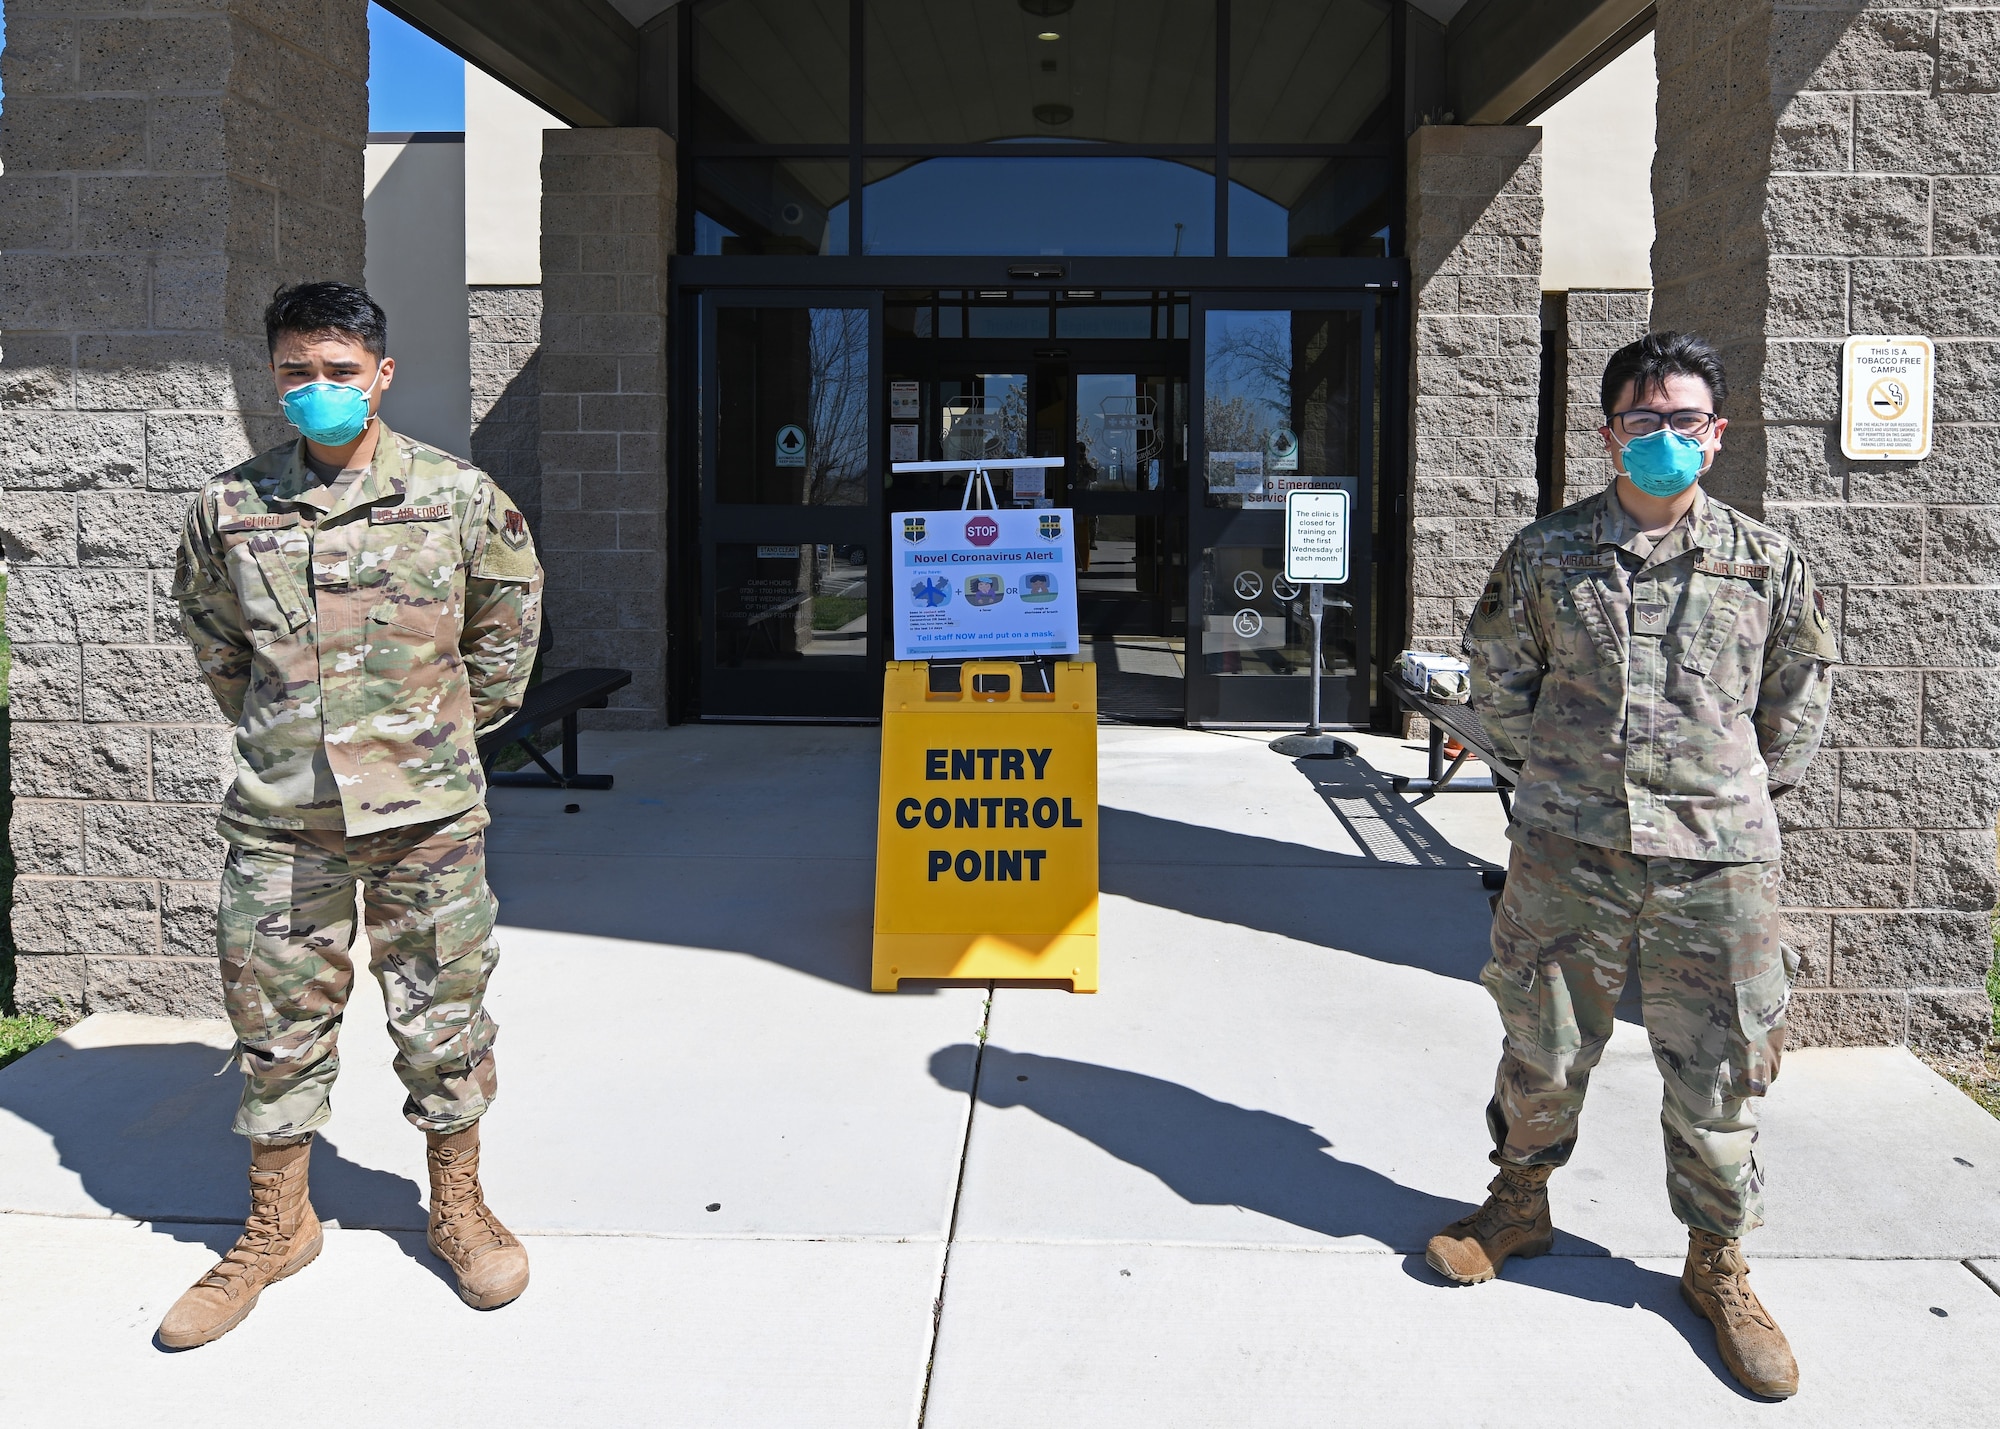 Airman Leon Guico, Left, 9th Medical Group (MDG) health administrator, and Senior Airman Christopher Miracle, 9th MDG optometry technician, guard the Entry Control Point (ECP) at the Clinic on Beale Air Force Base, California, Mar. 12, 2020. The ECP was set up at the Beale Clinic to protect Airmen and their families from the growing COVID-19 threat. (U.S. Air Force photo by Airman 1st Class Luis A. Ruiz-Vazquez)